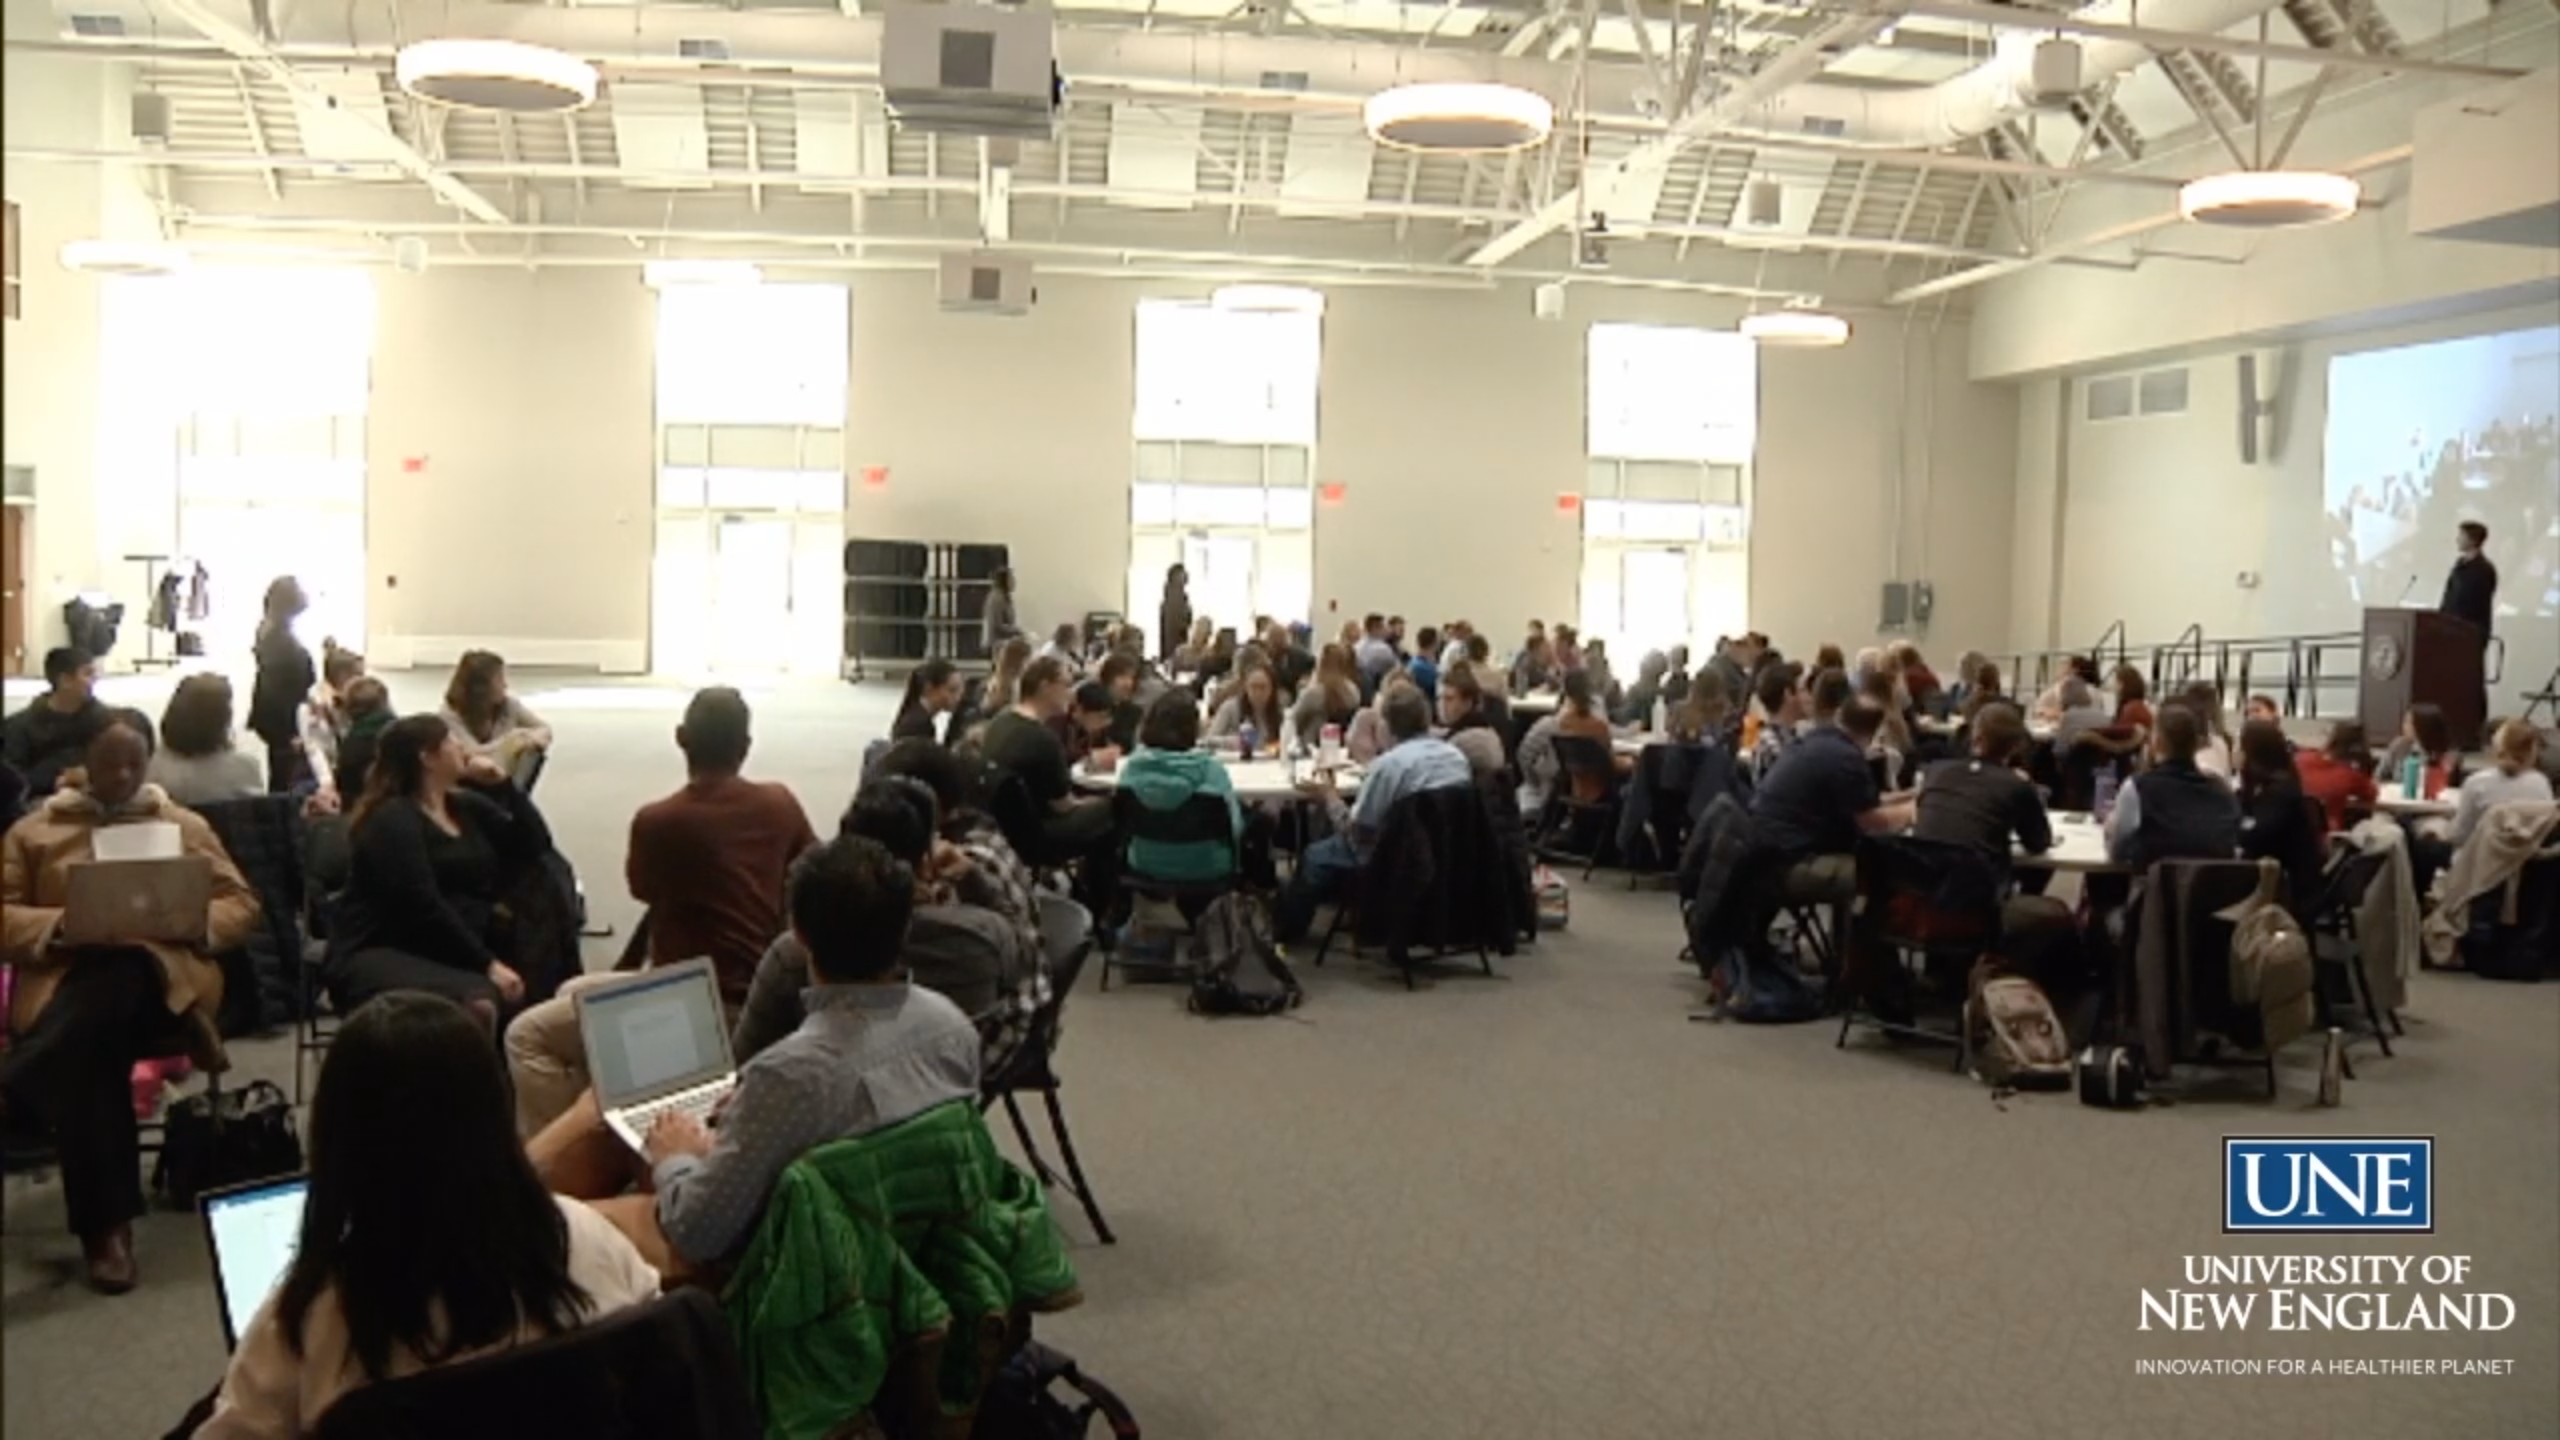 shot of the crowd in attendance at the IPEC chronic pain event